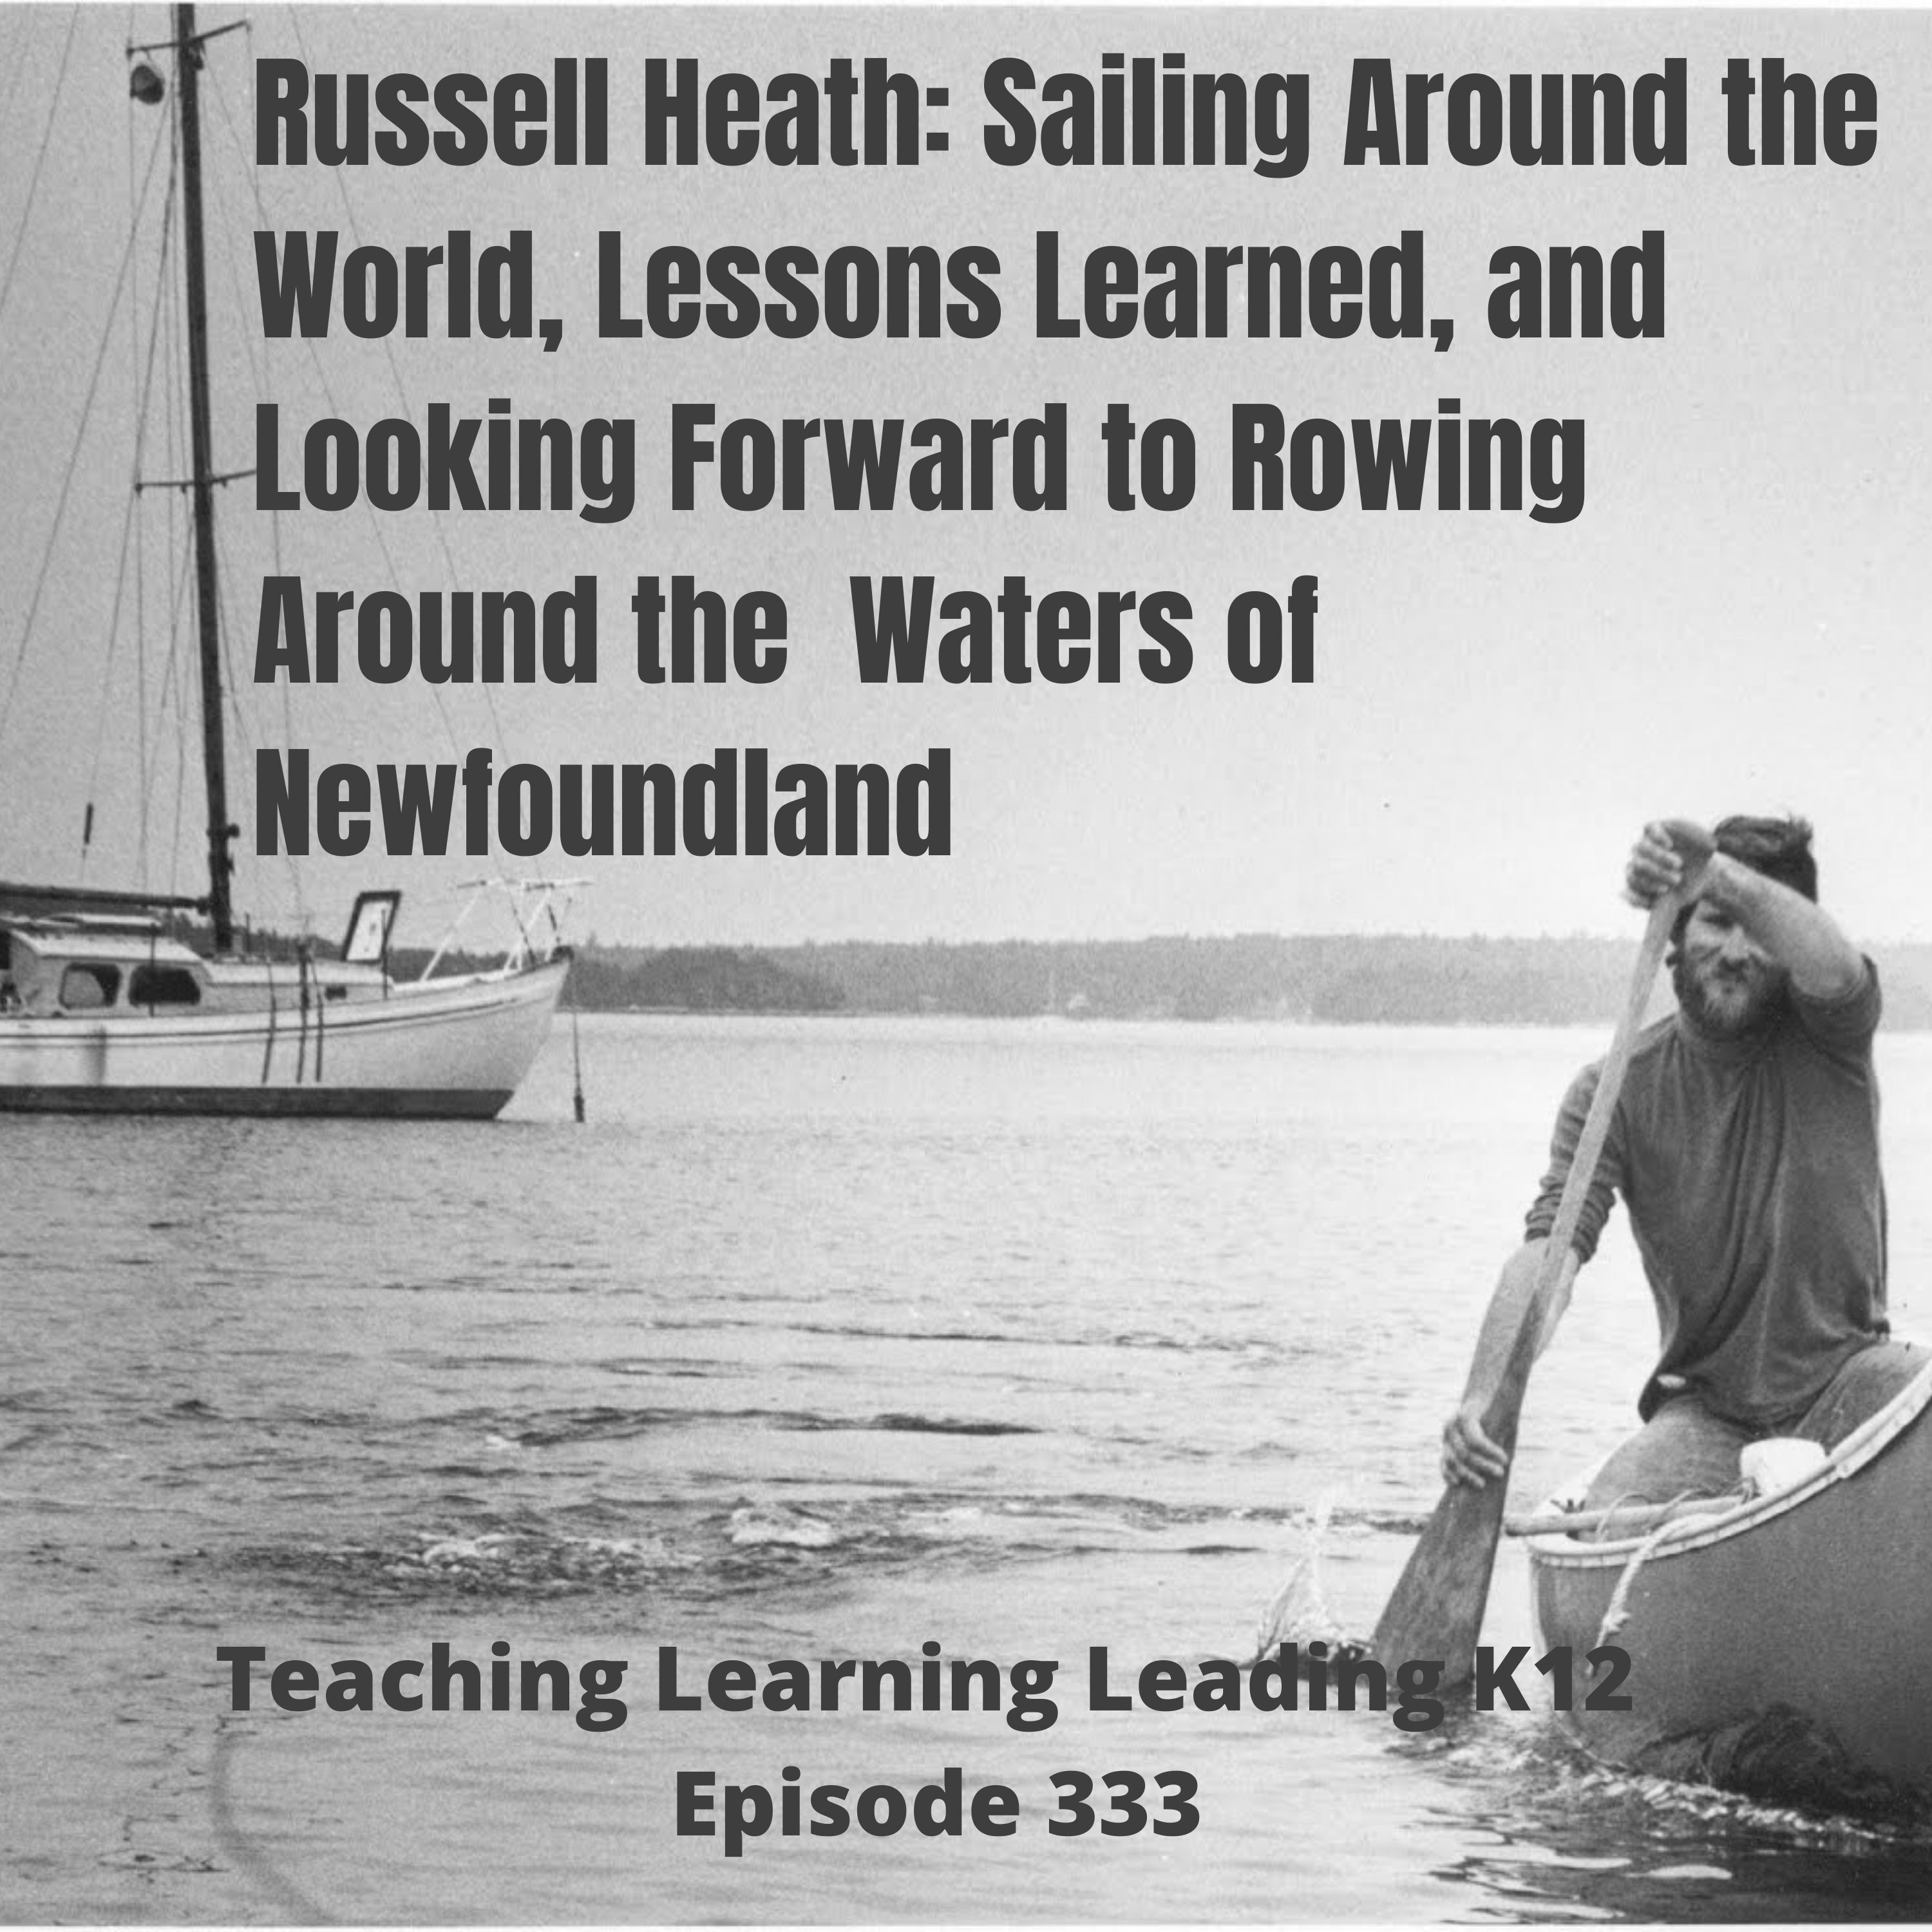 Russell Heath: Sailing Around the World, Lessons Learned, and Looking Forward to Rowing Around the Waters of Newfoundland - 333 Image